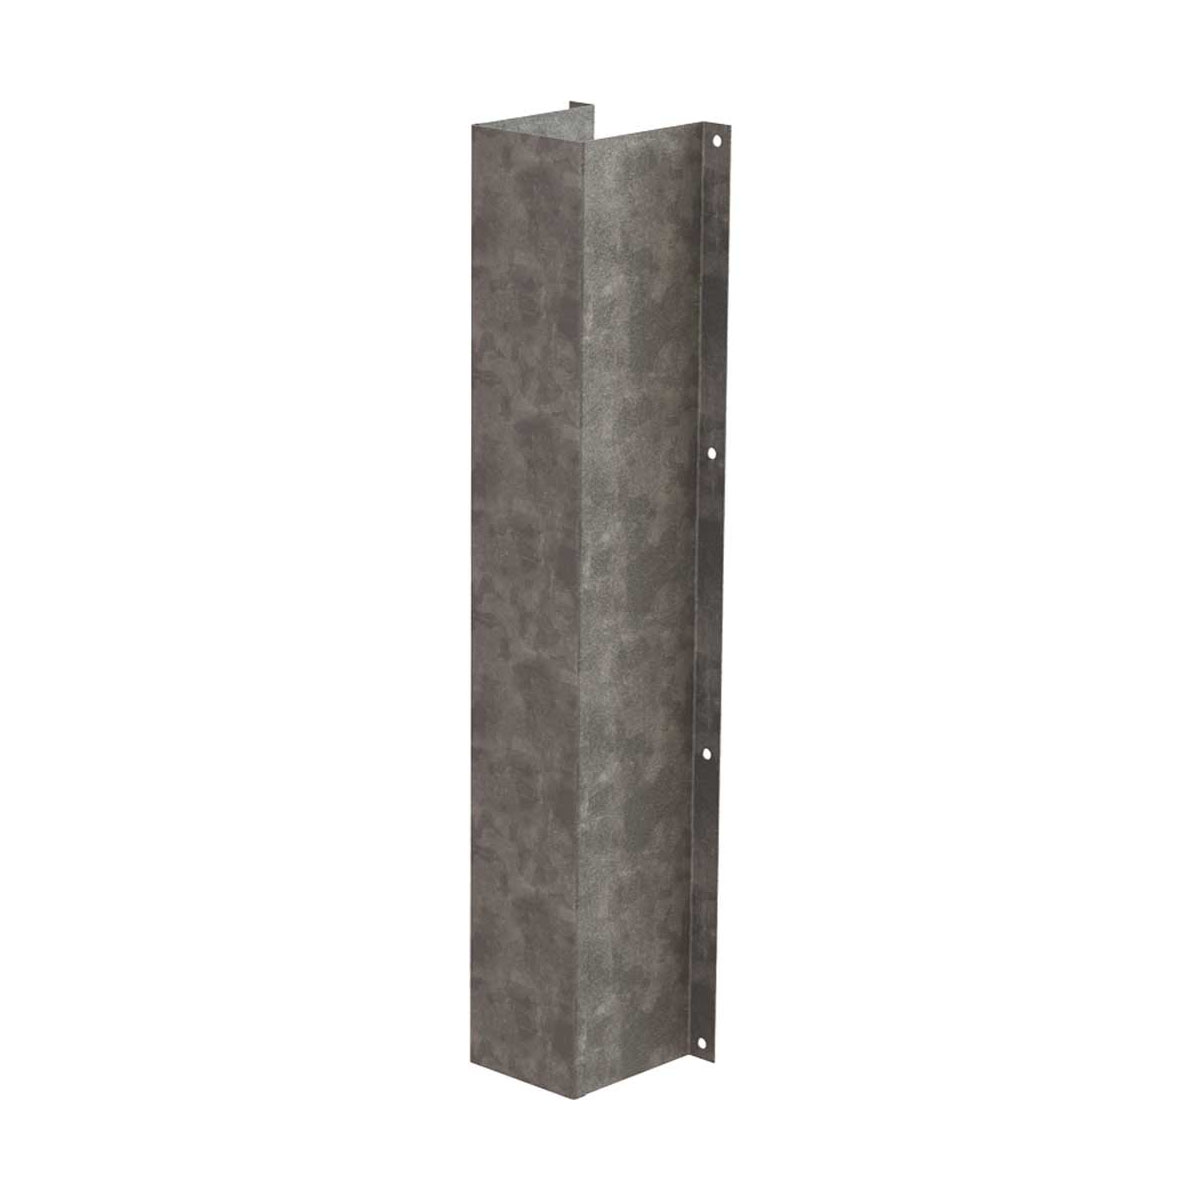 Buy Downpipe Protector - Square (Galvanised) available at Astrolift NZ